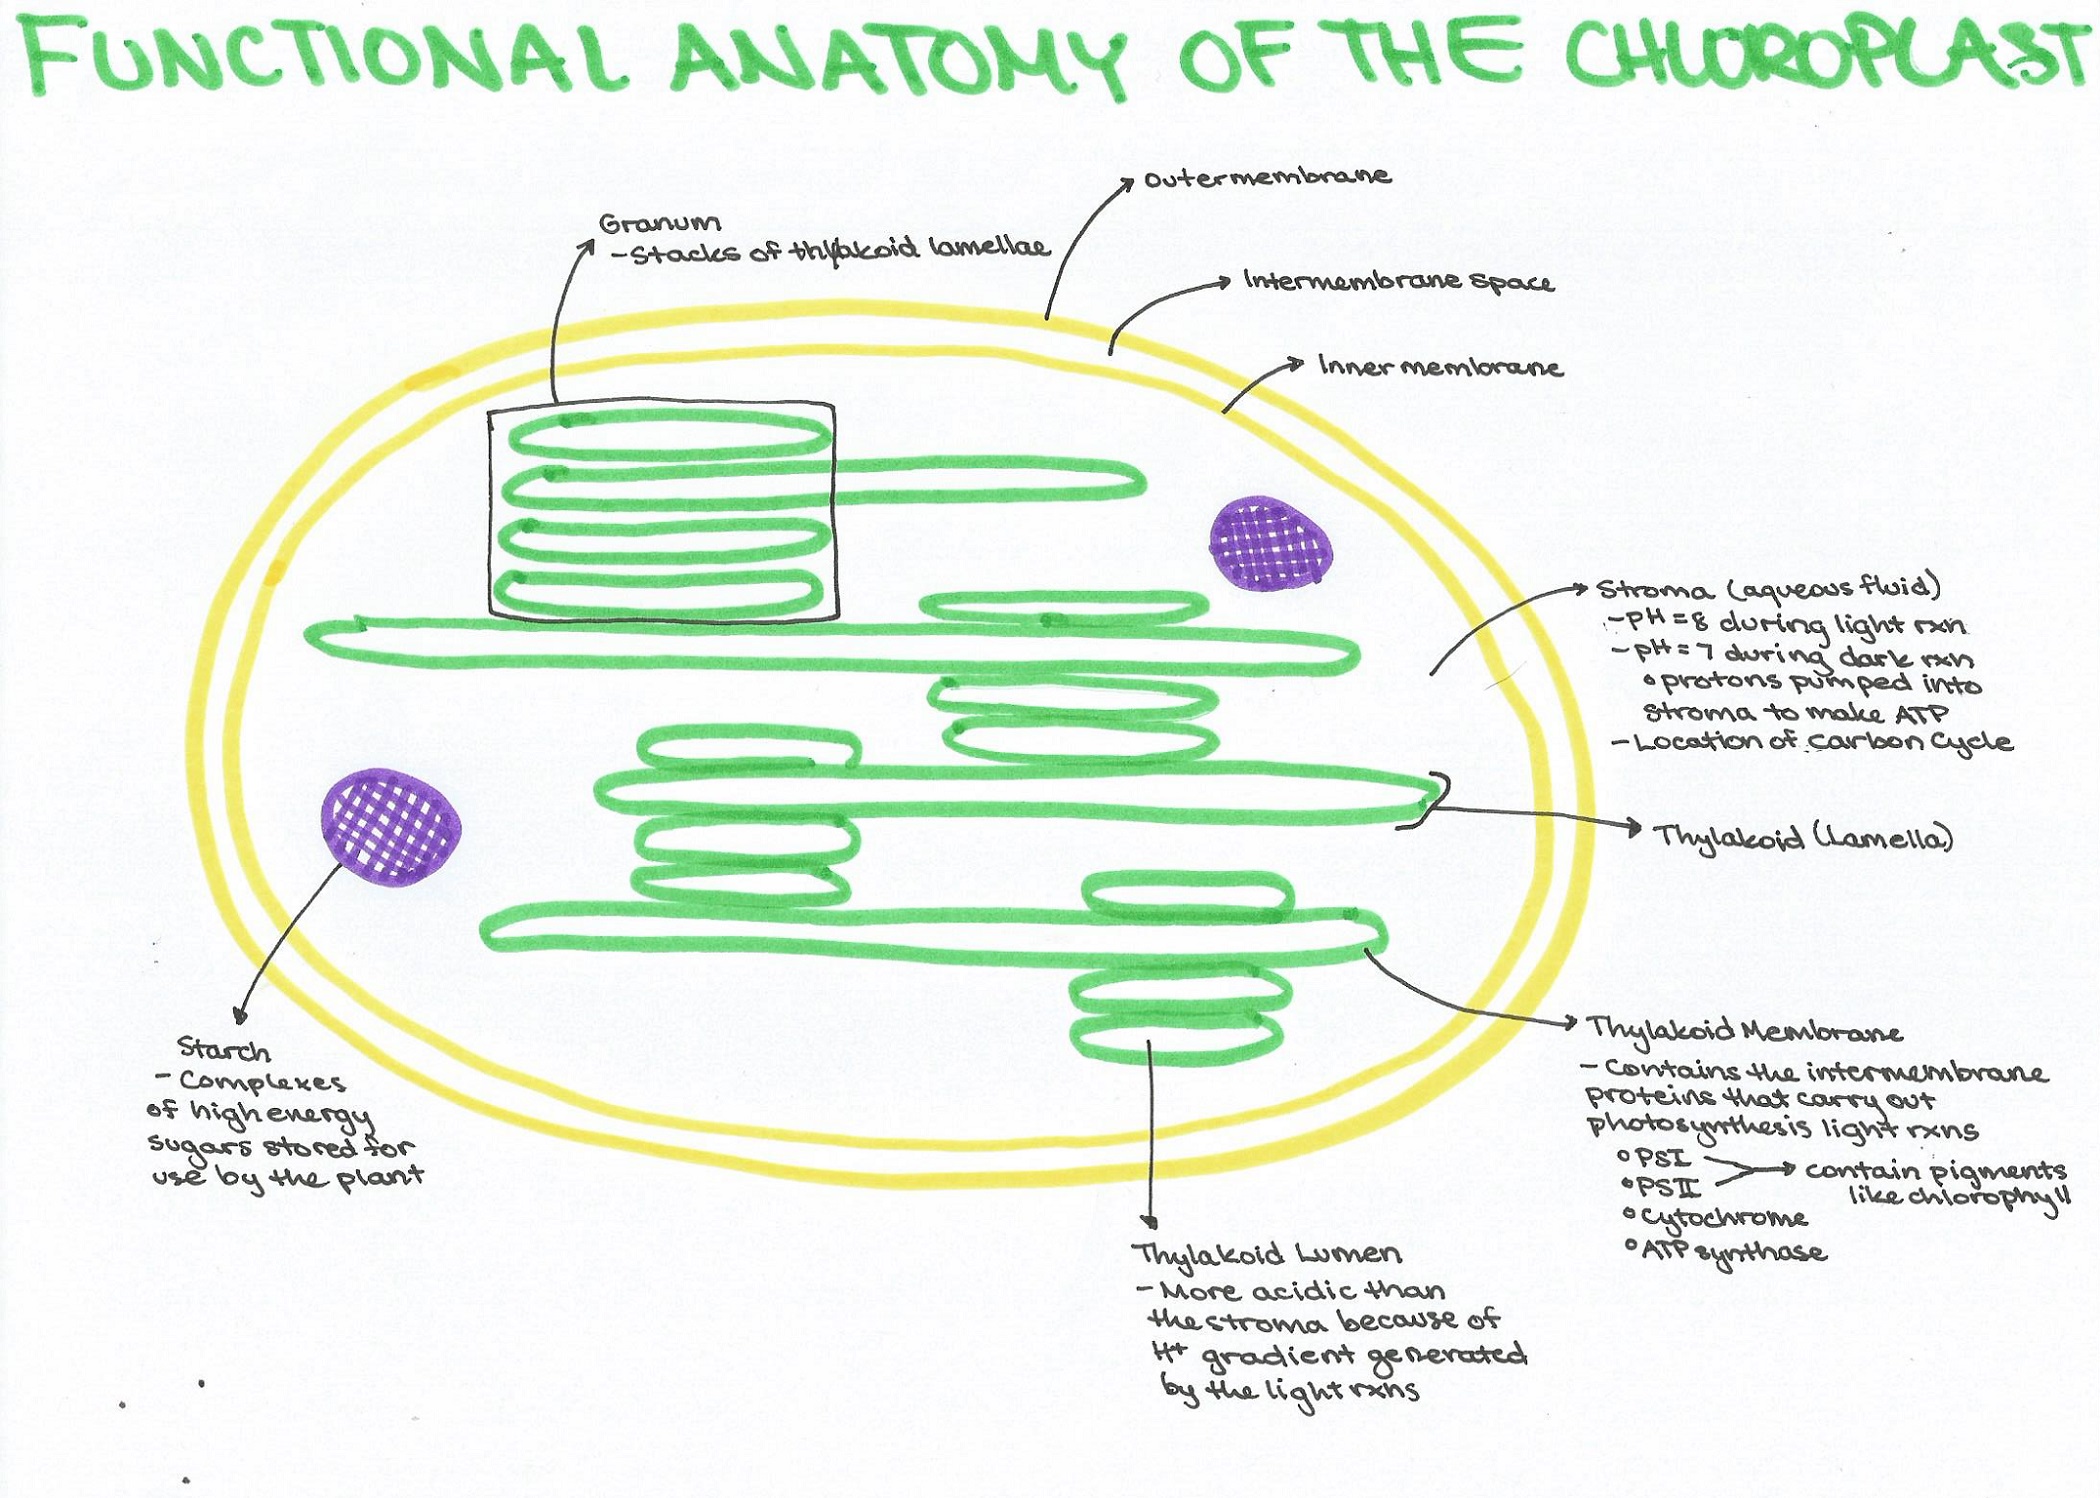 Function and Diagram of Chloroplast